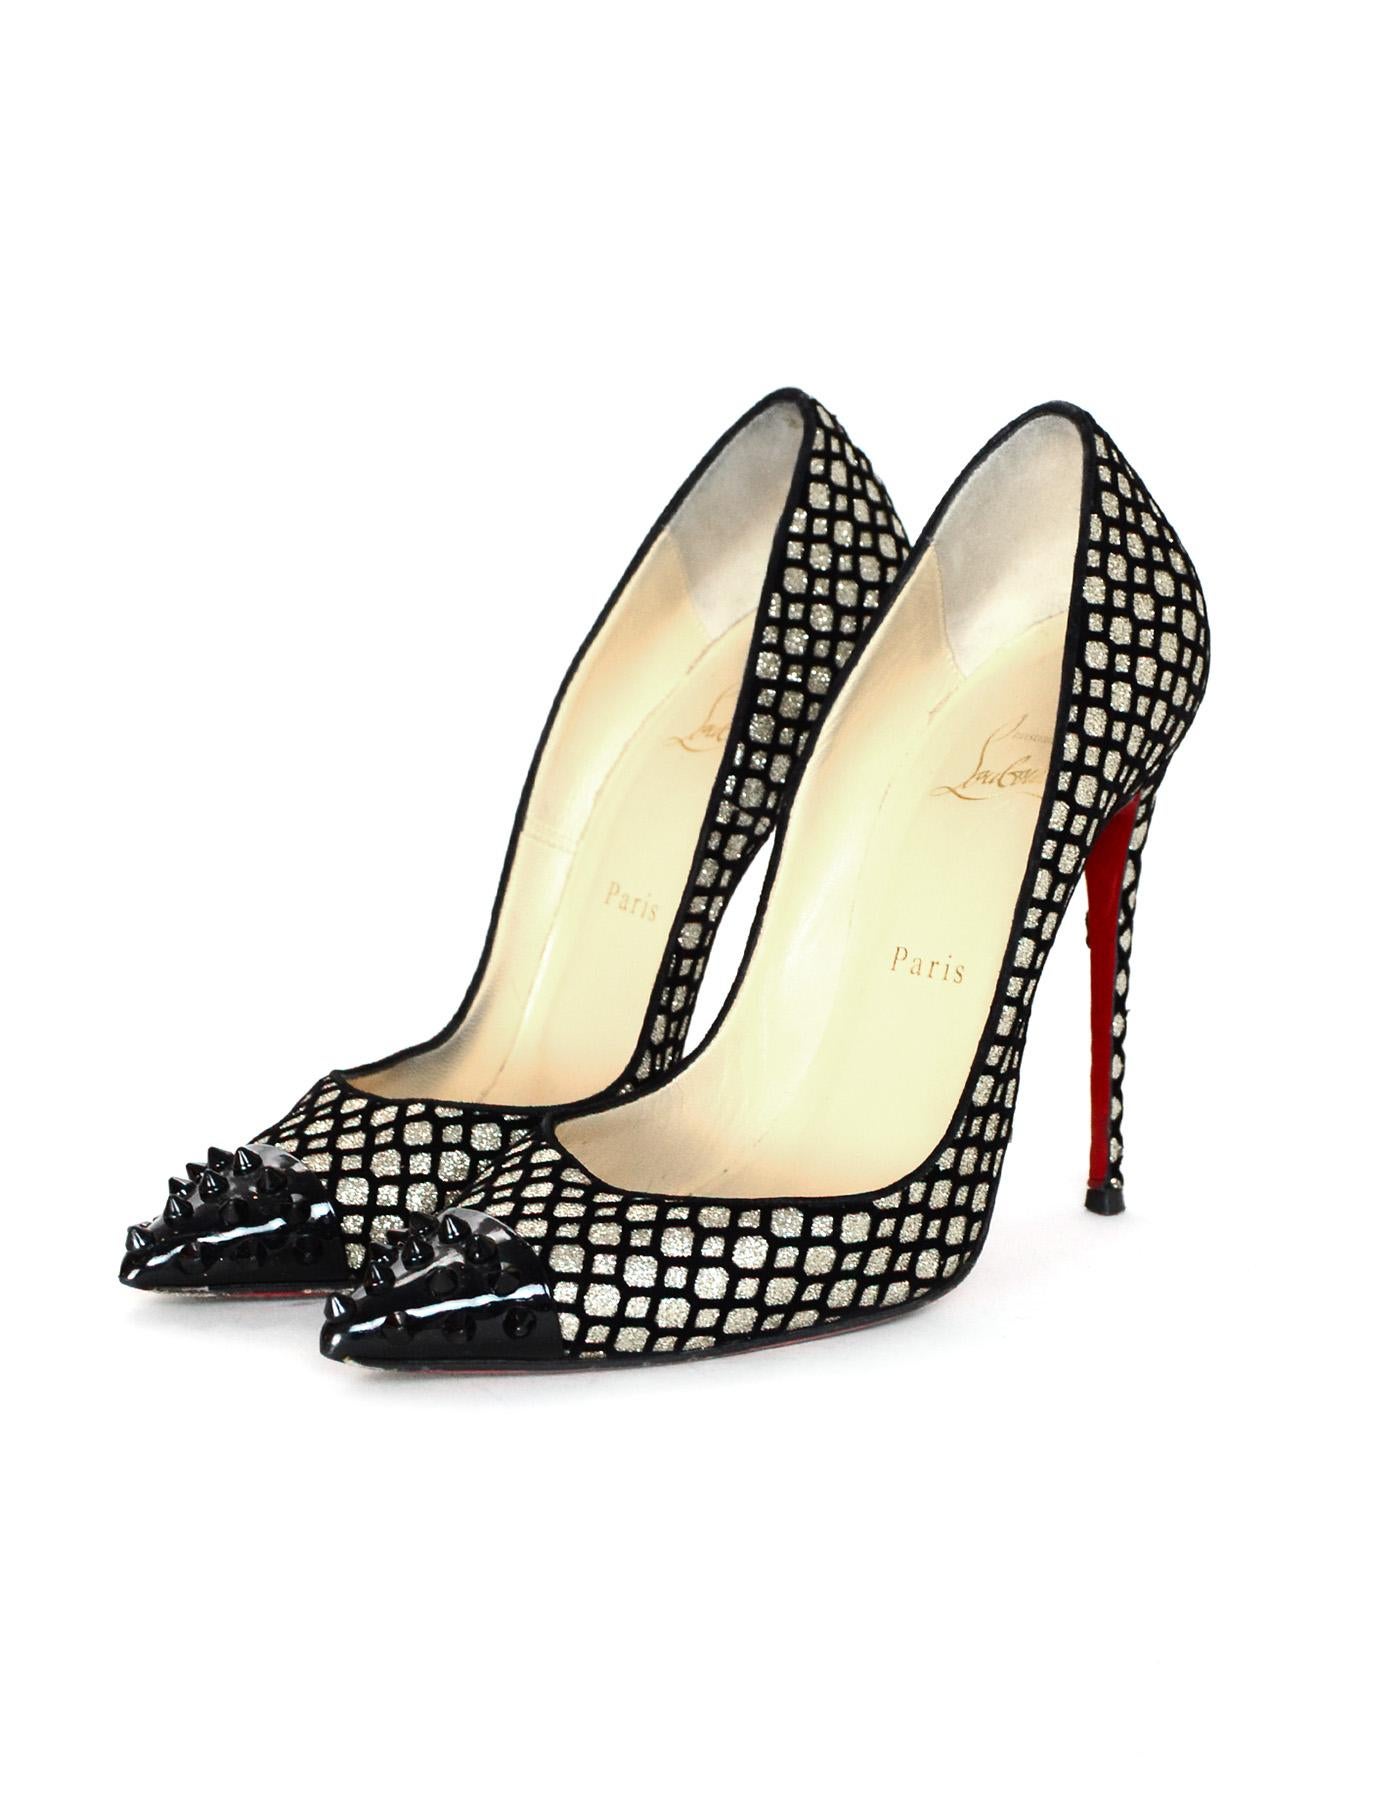 Christian Louboutin Black Velvet/Silver Fishnet Mermaid Design W/ Spike Cap Toe Sz 39

Made In: Italy
Color: Black and silver
Materials: Glitter, leather, metal, and velvet
Closure/Opening: Slide on
Overall Condition: Good pre-owned condition with